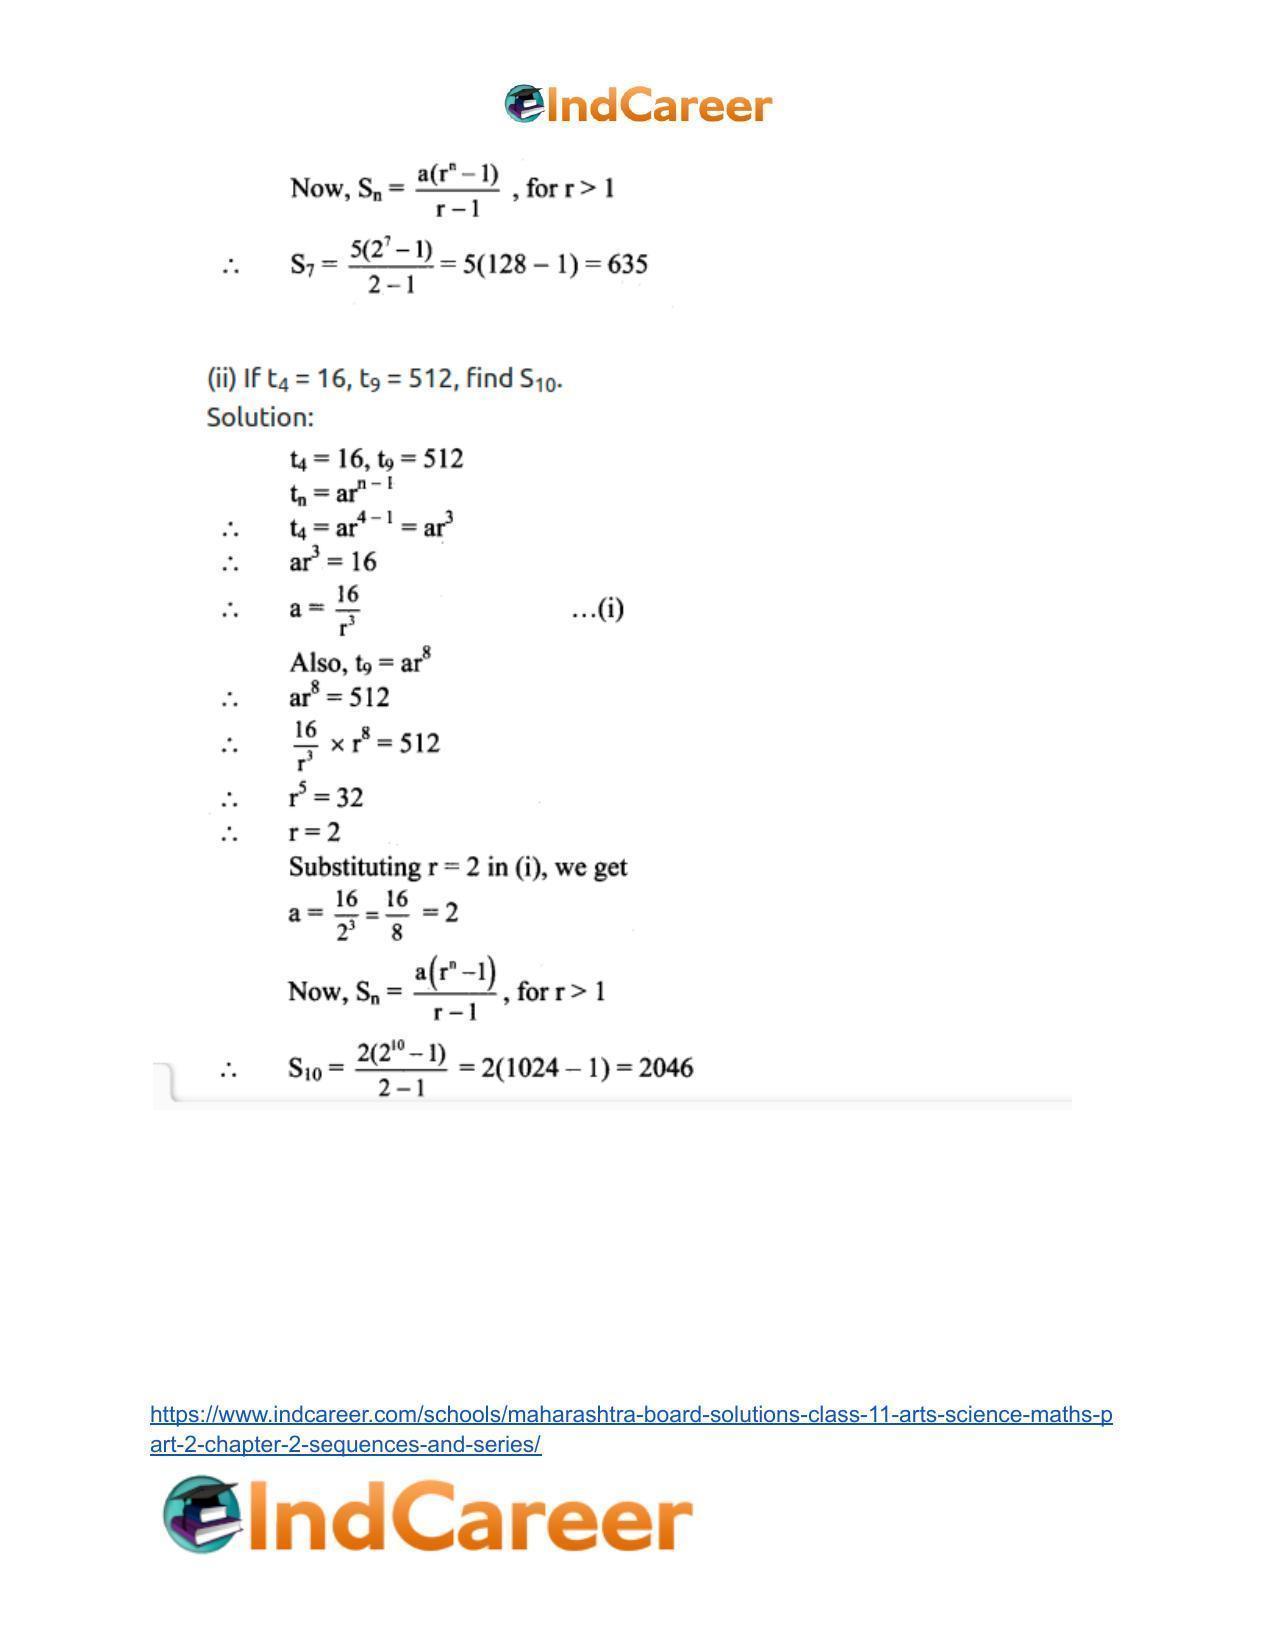 Maharashtra Board Solutions Class 11-Arts & Science Maths (Part 2): Chapter 2- Sequences and Series - Page 28